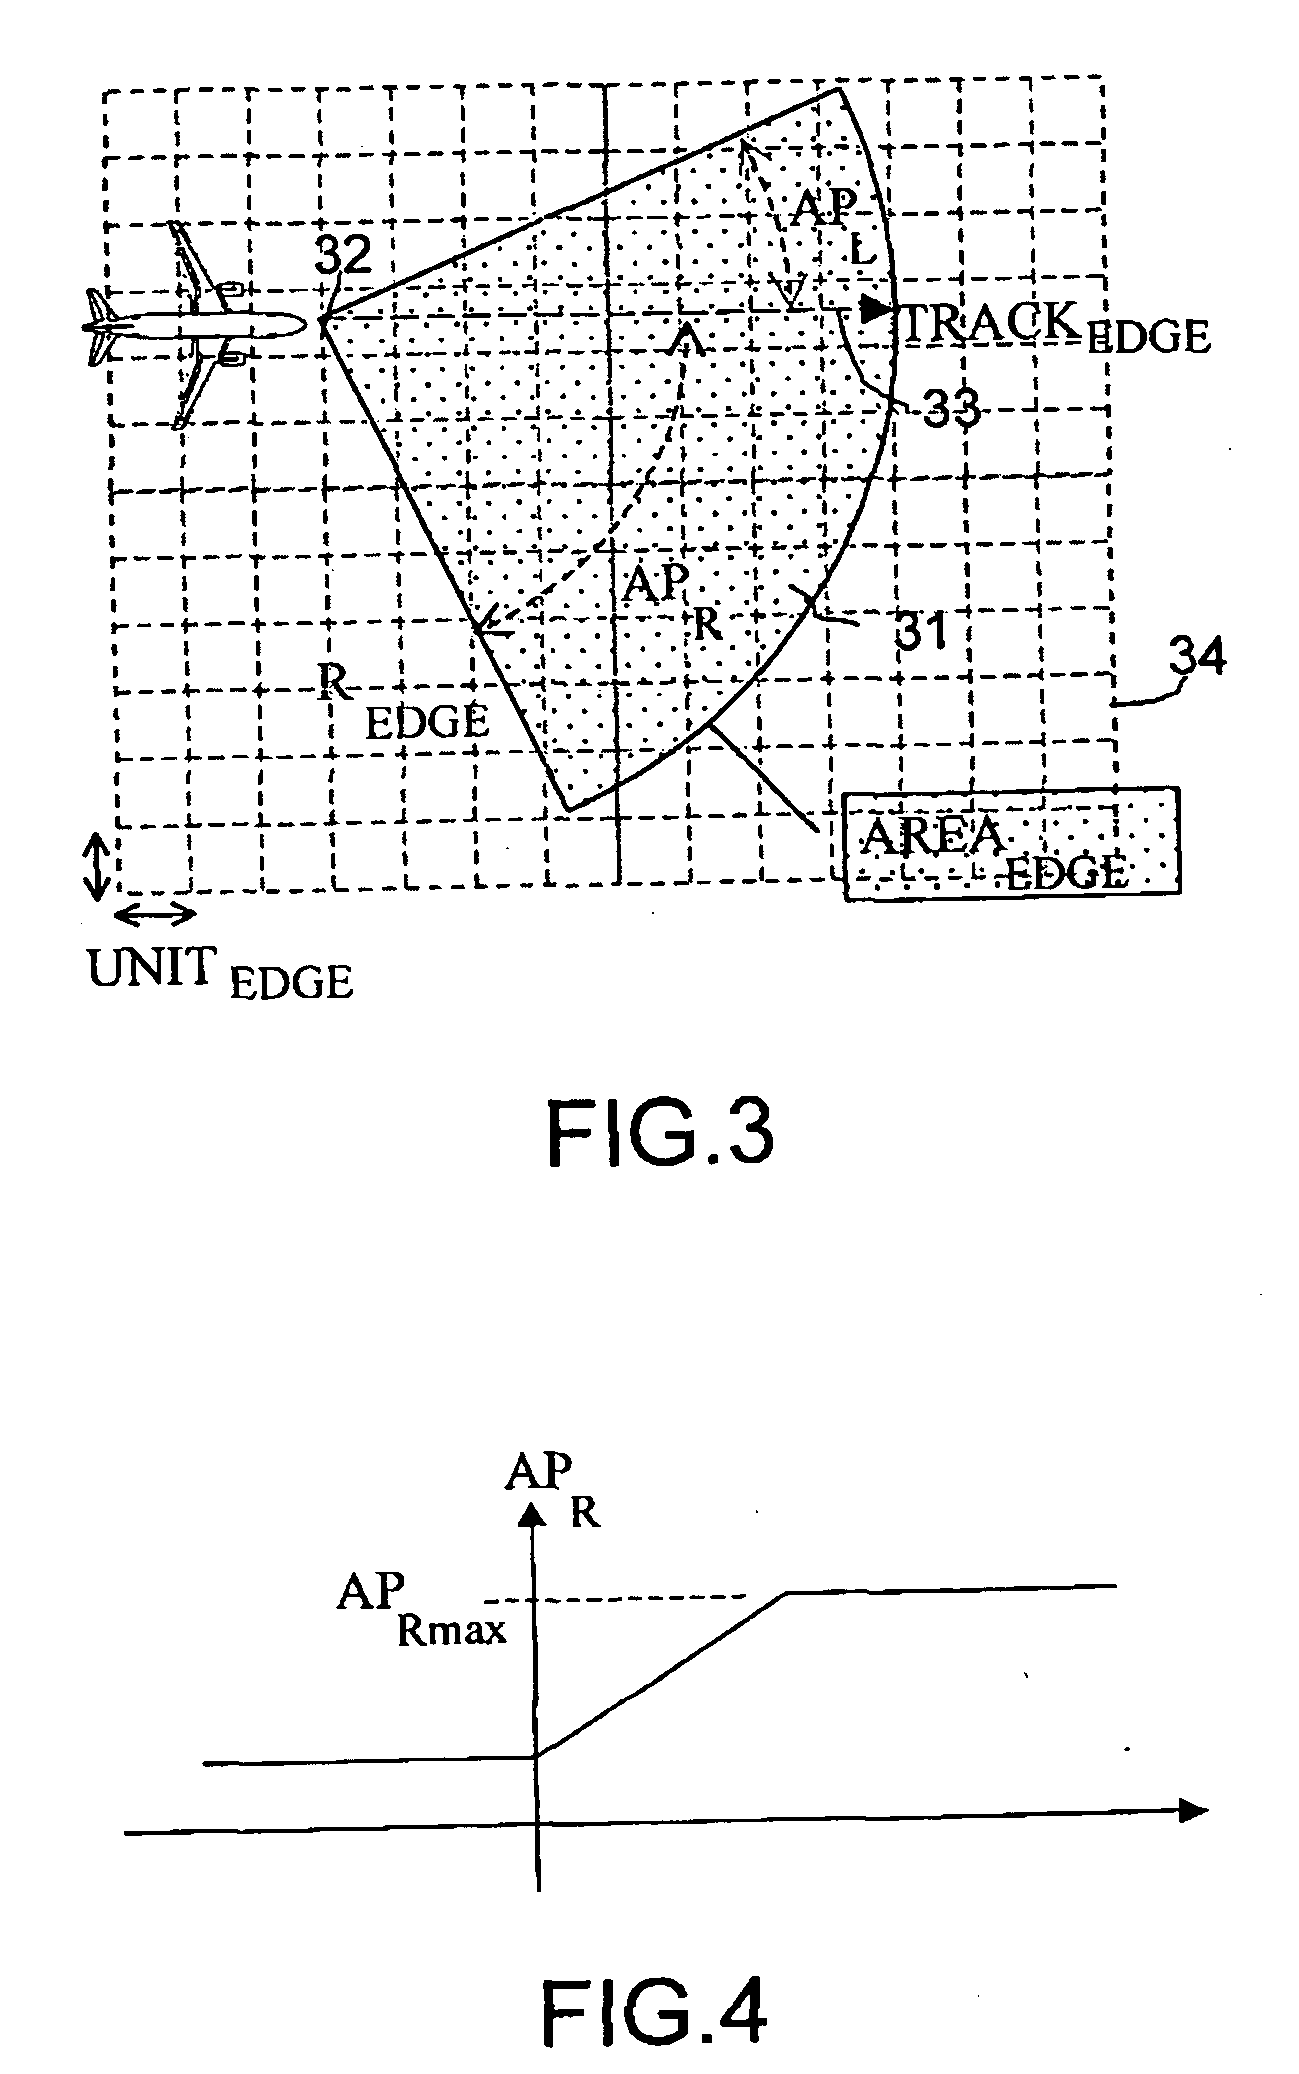 Topographic map display device for aircraft